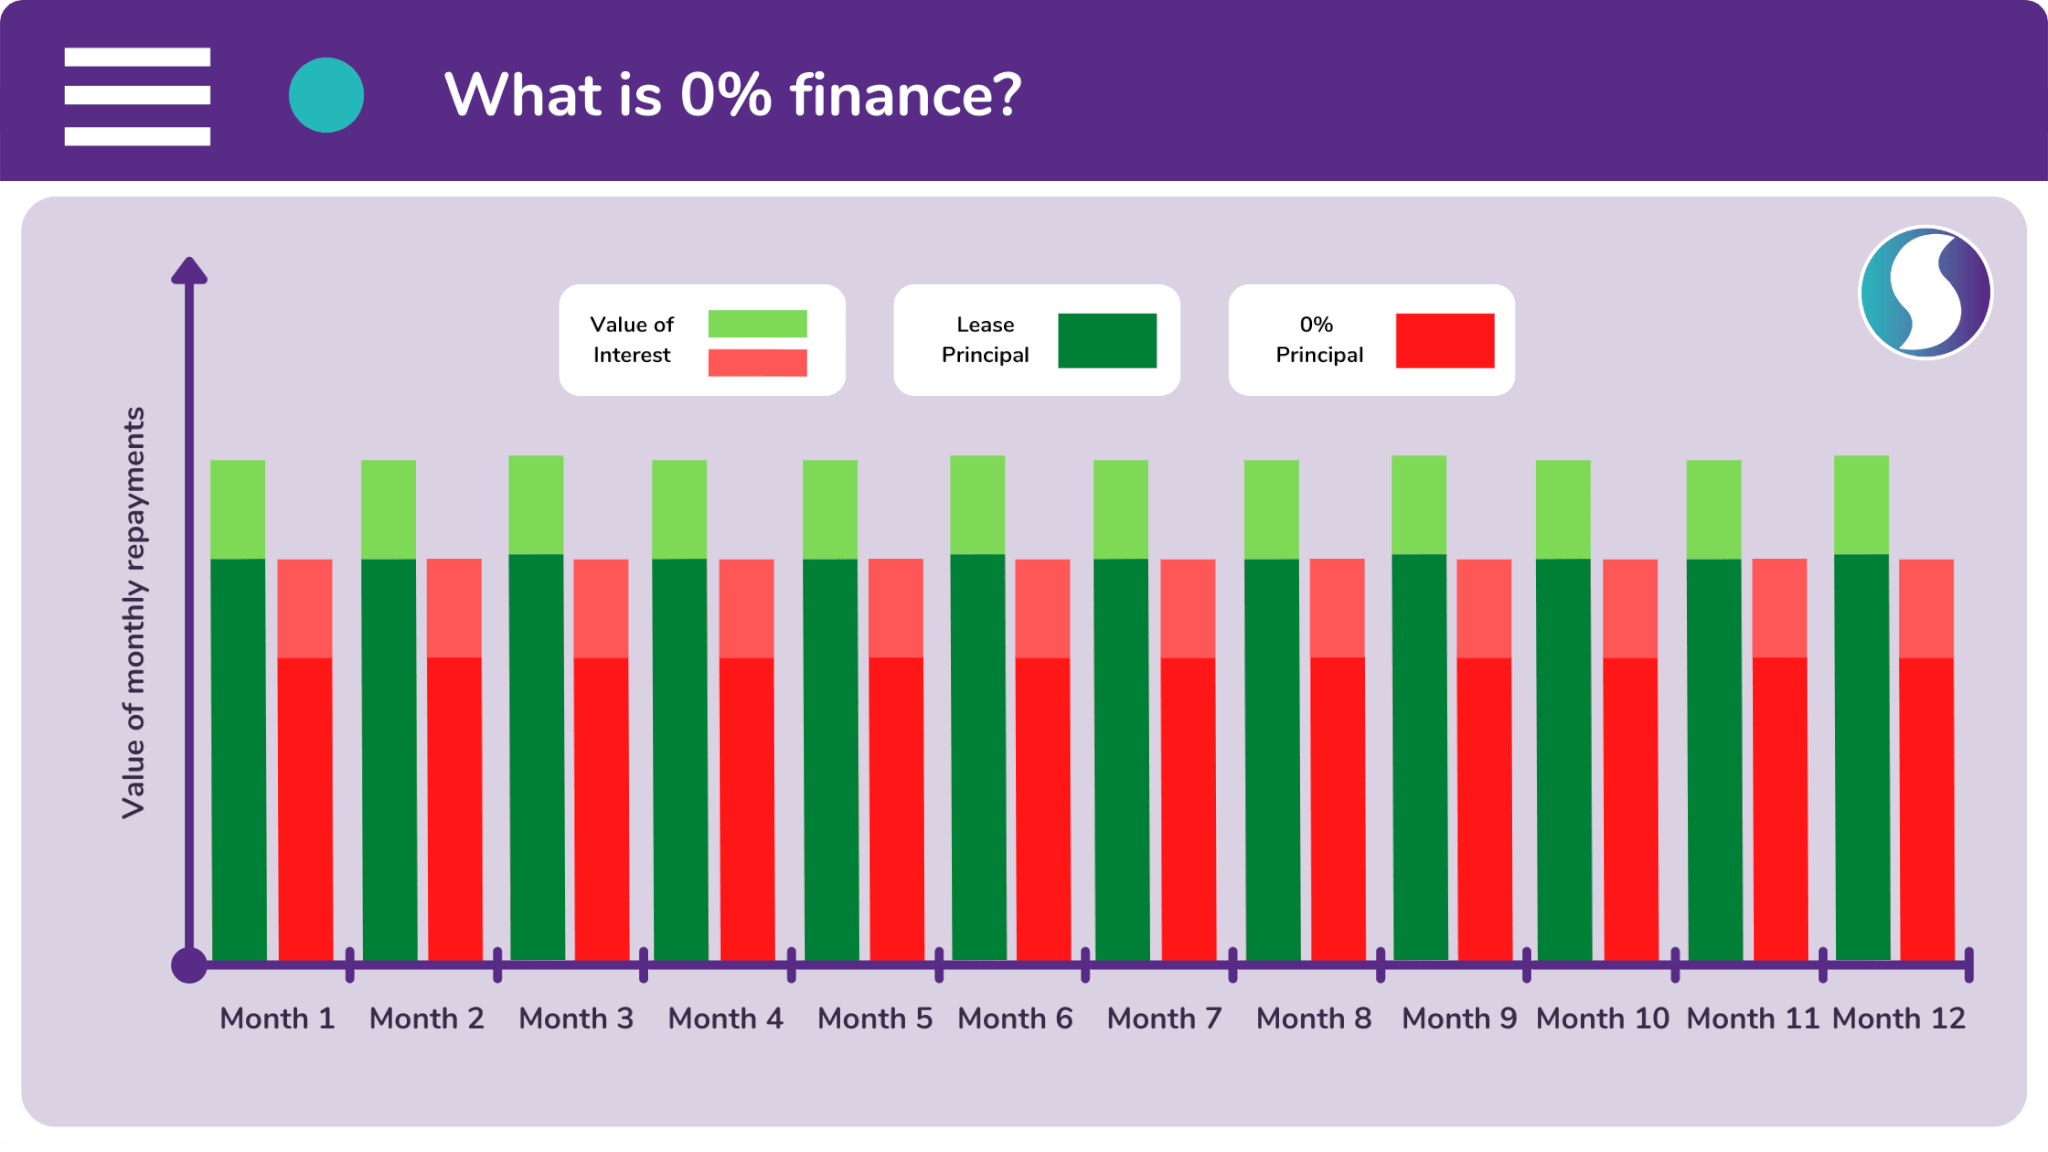 0% finance is a type of sales enablement finance which hides the cost of interest.